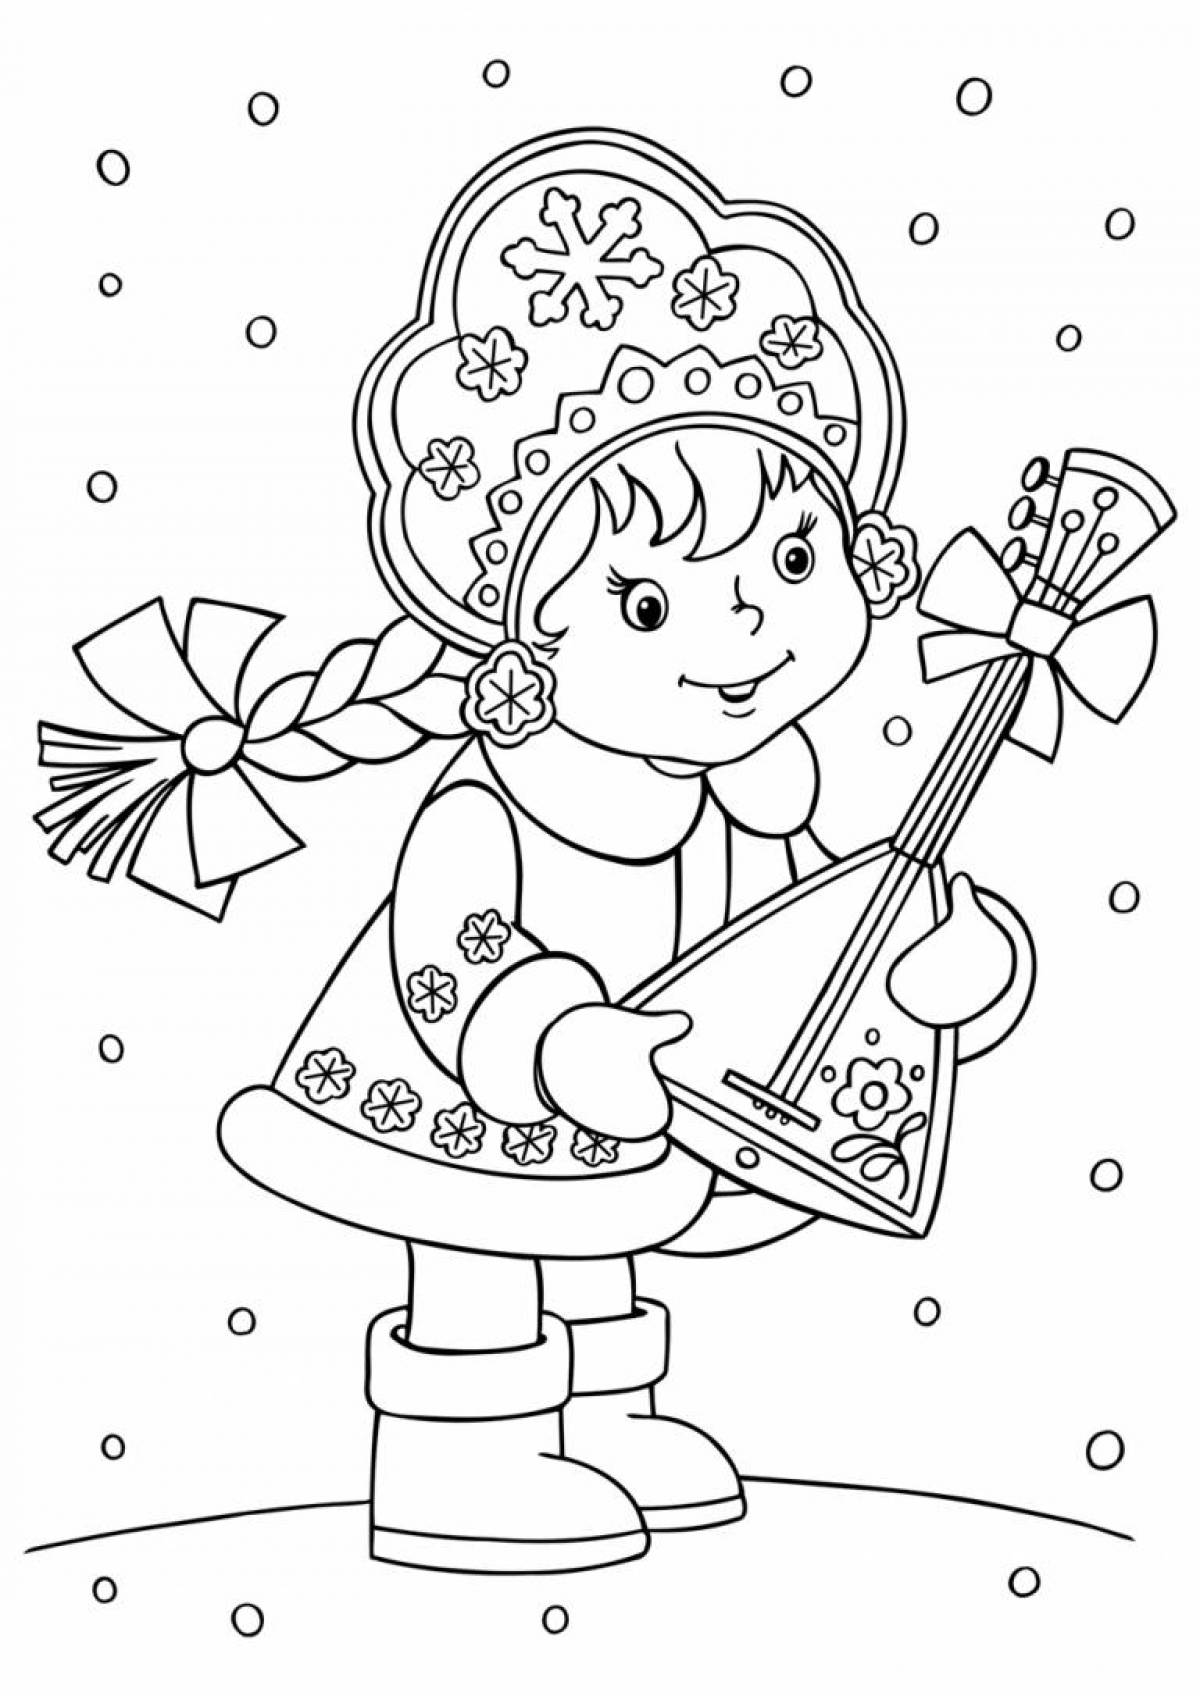 Charming snow maiden coloring book for kids